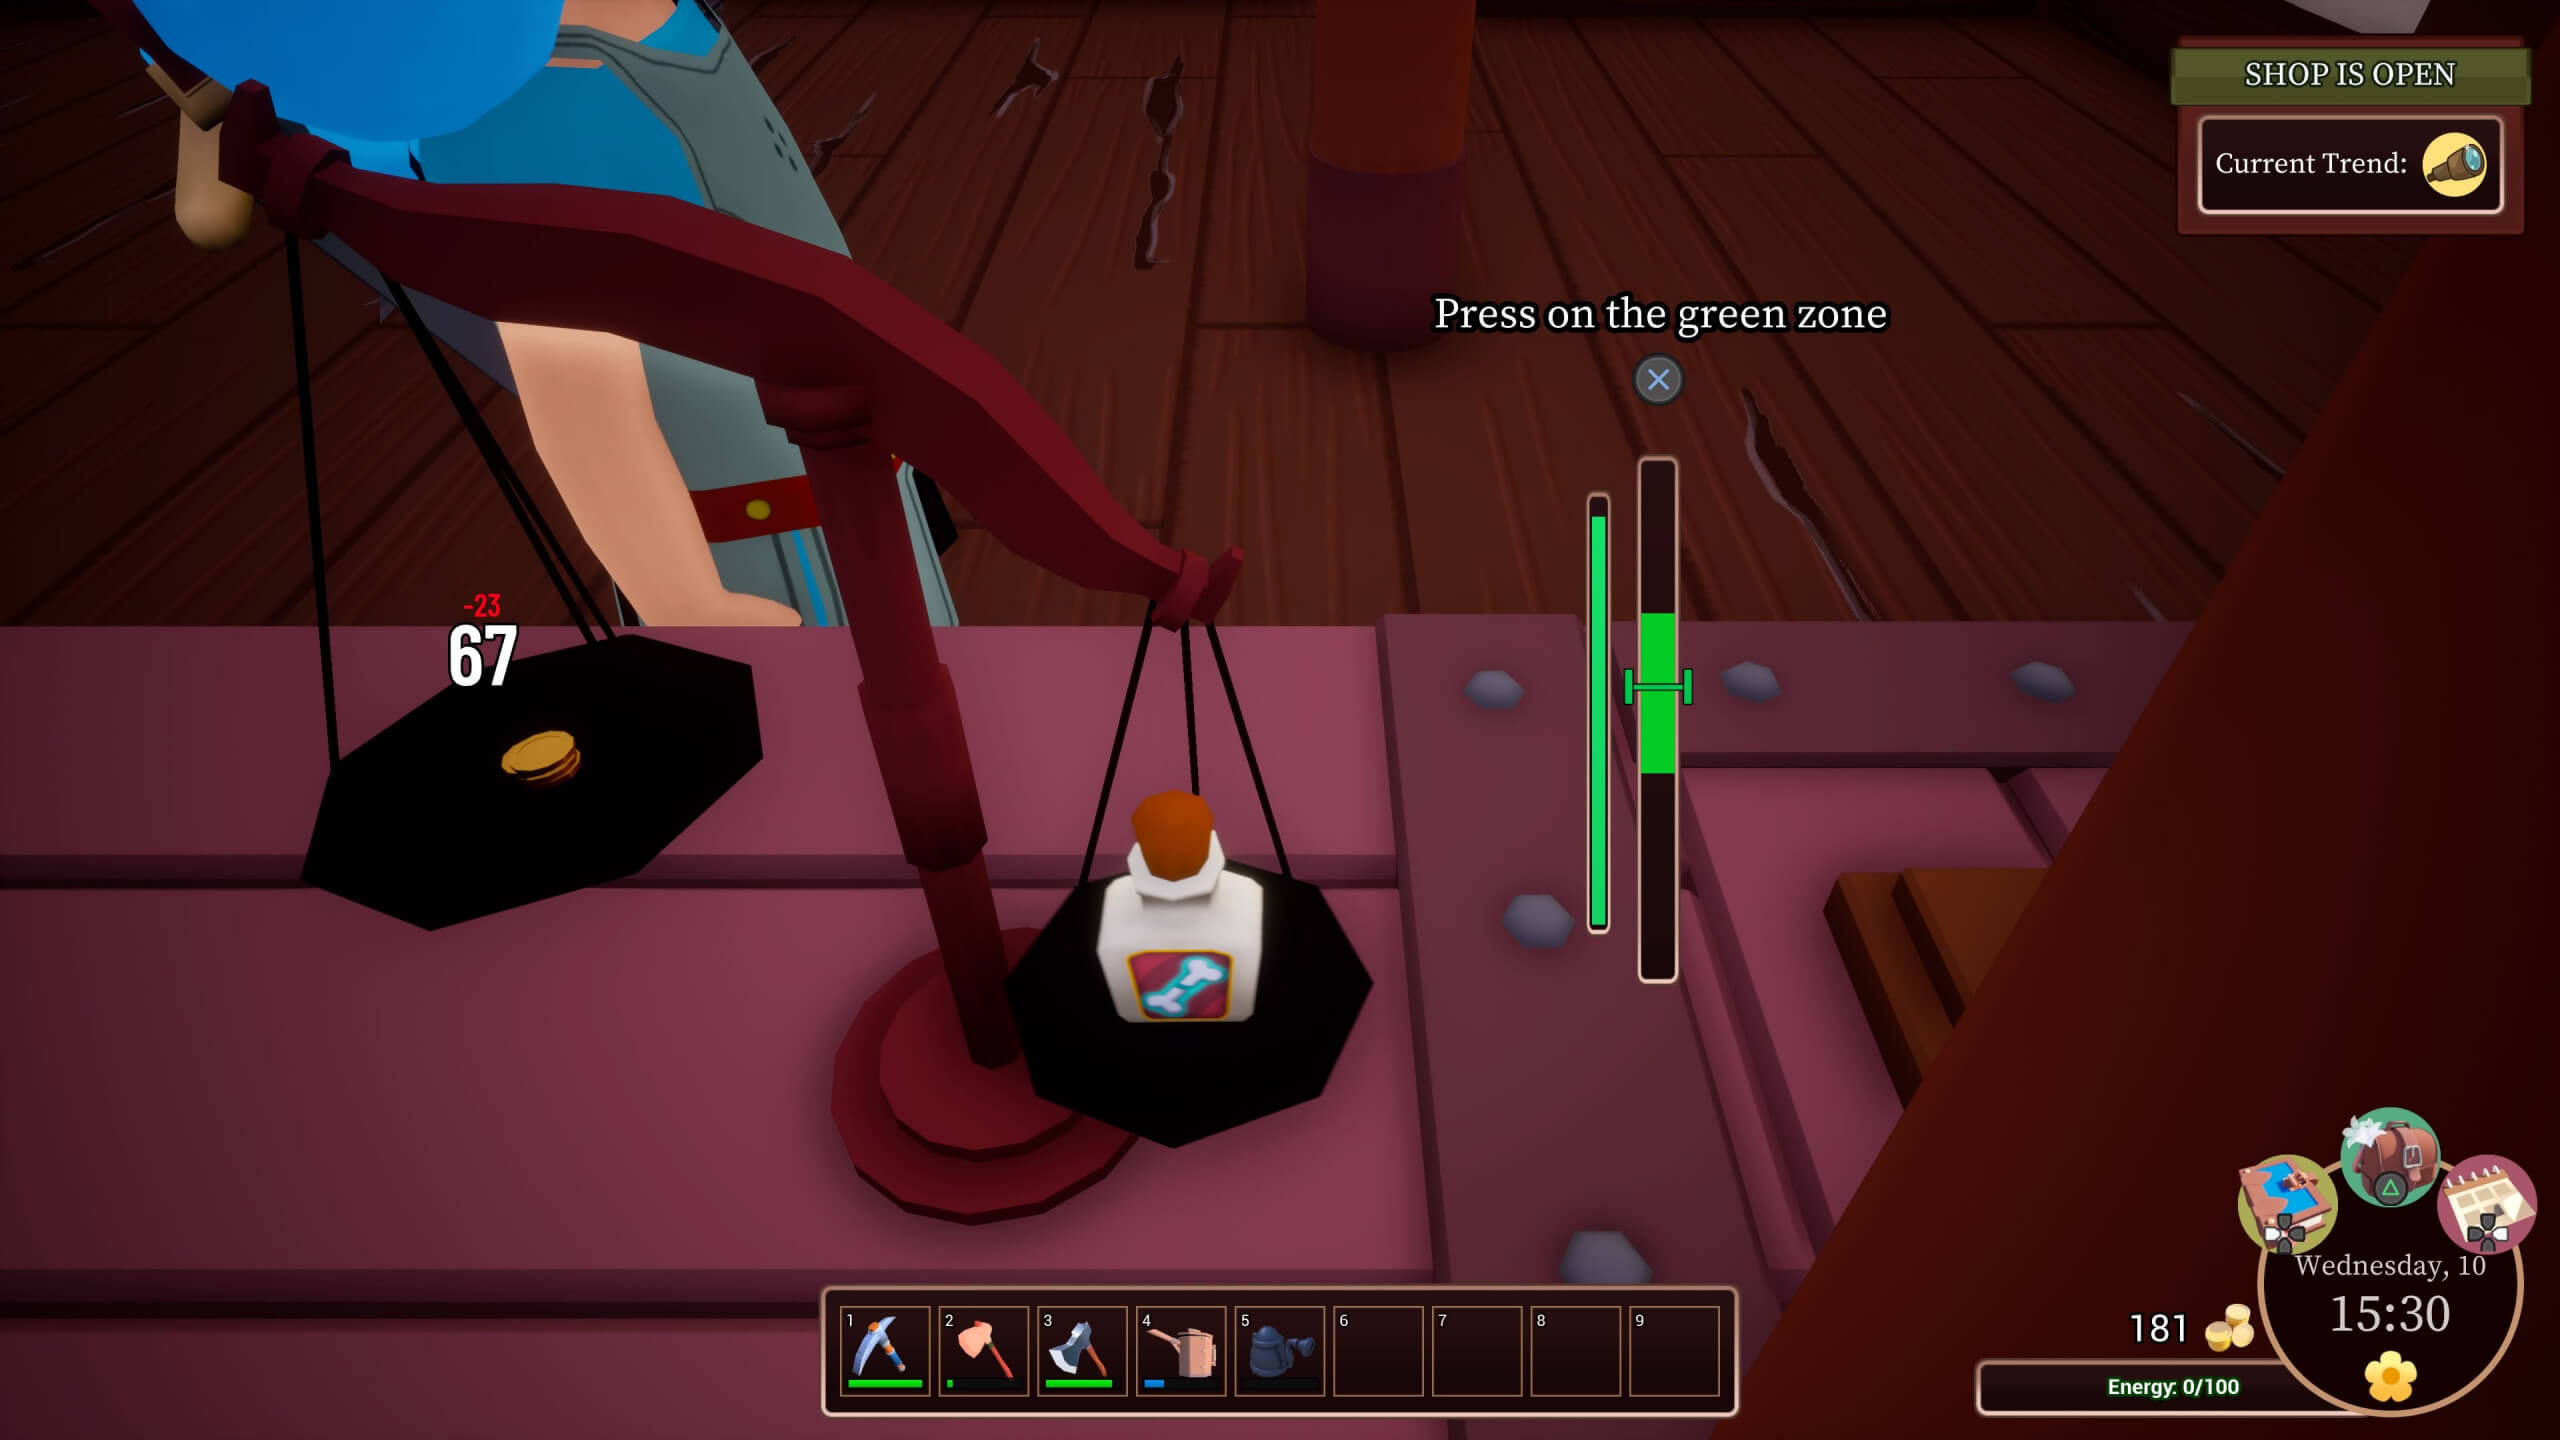 An image showing off the in game haggling minigame which requires you to press x when a line reaches a green bar.